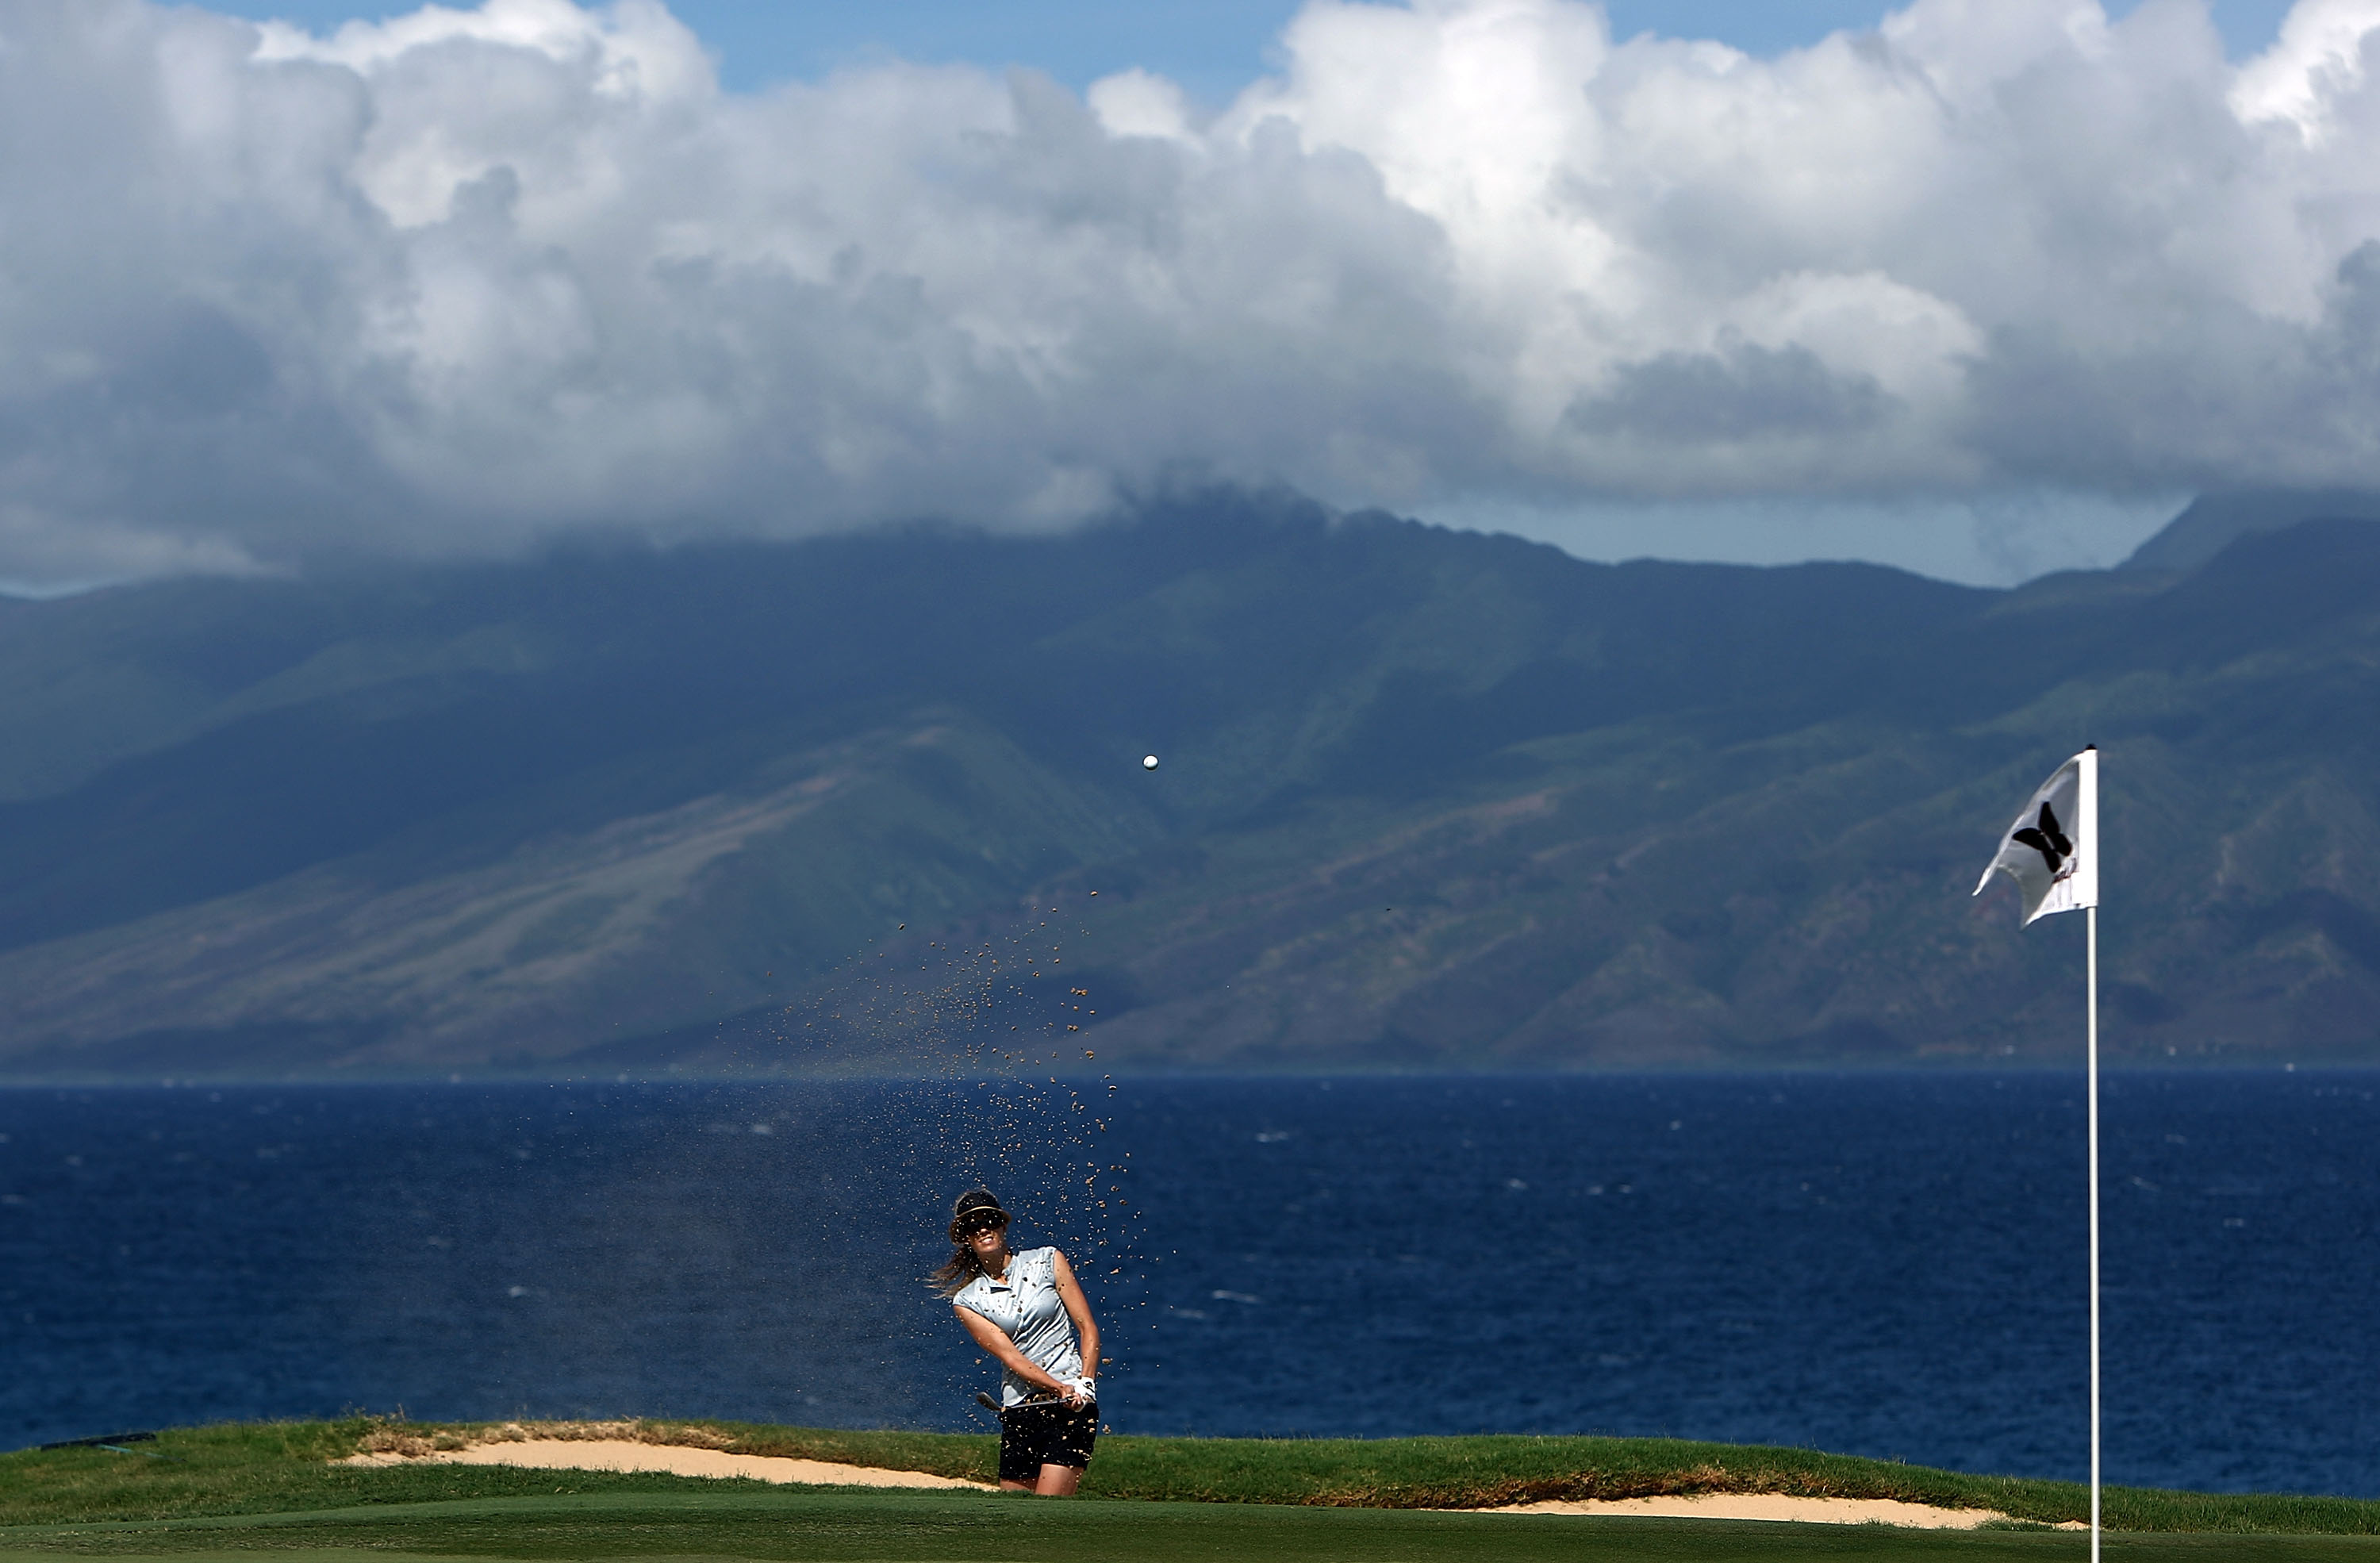 KAPALUA, HI - OCTOBER 16: Anna Rawson of Australia hits out of the green bunker on the 5th hole during the first round of the Kapalua LPGA Classic on October 16, 2008 at the Bay Course in Kapalua, Maui, Hawaii. (Photo by Donald Miralle/Getty Images)